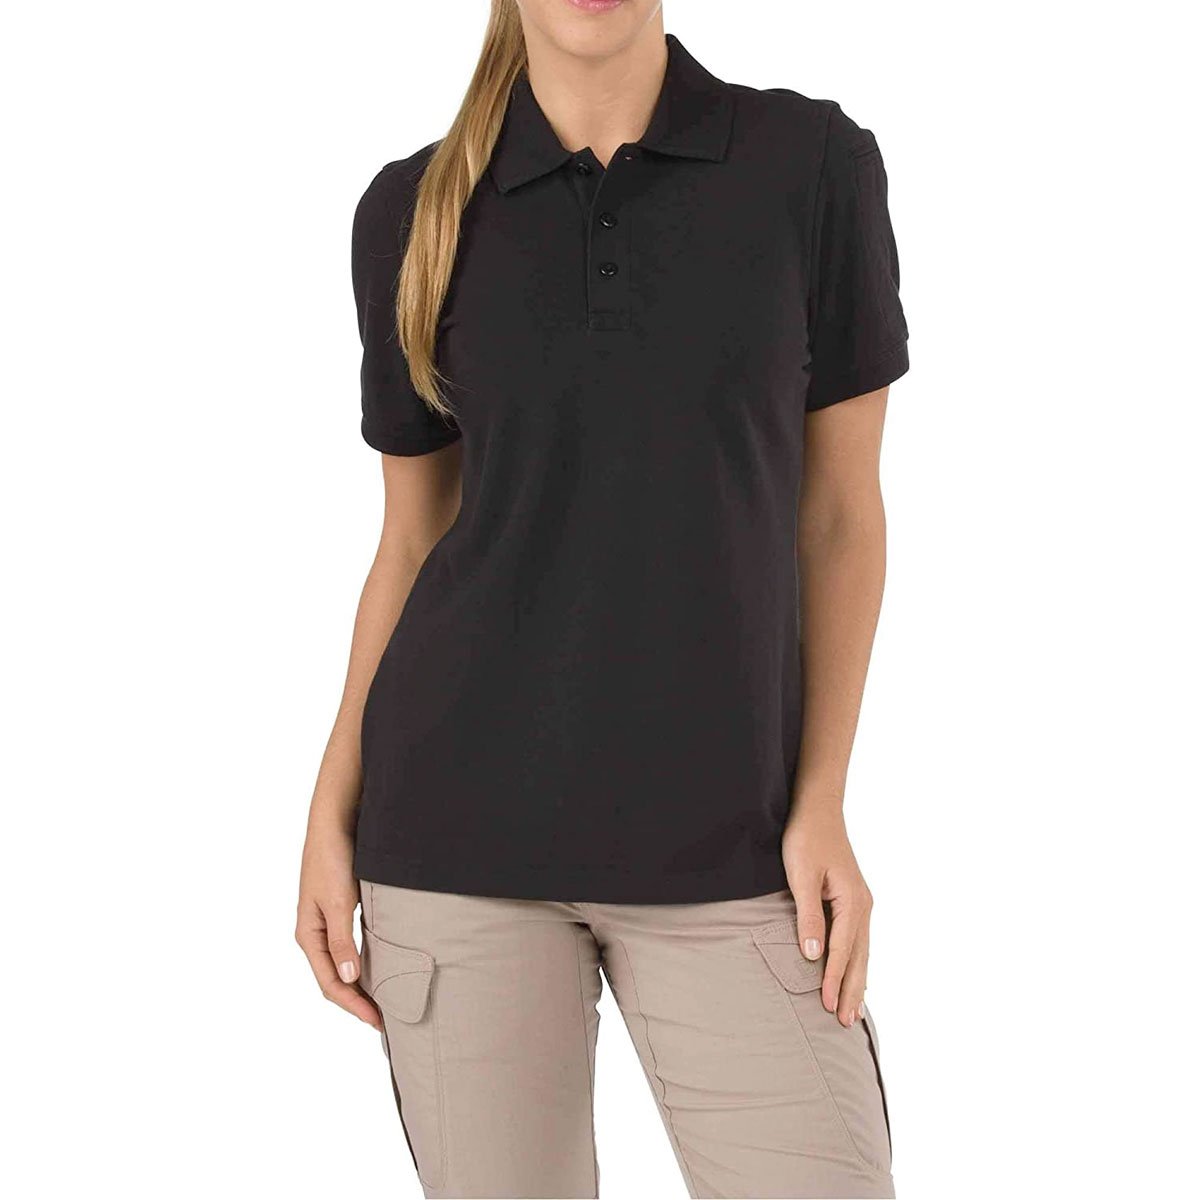 5.11 Tactical Womens Performance Short Sleeve Polo | Tactical Gear Australia Tactical Gear